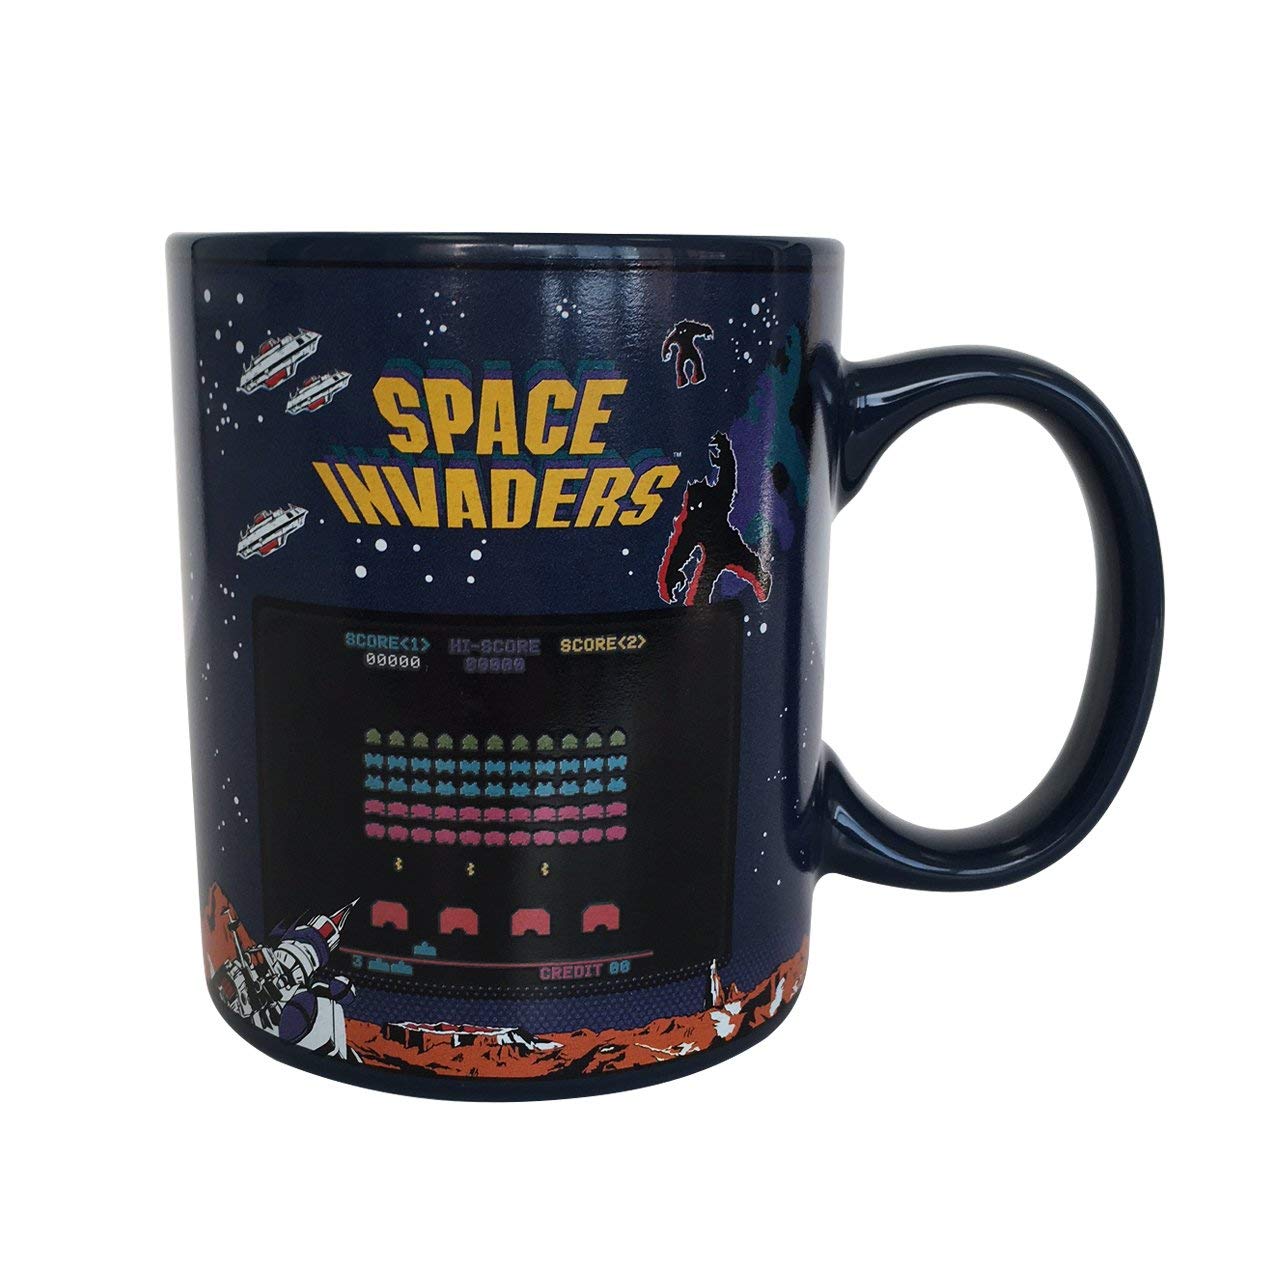 Taza Space Invaders solo 5€